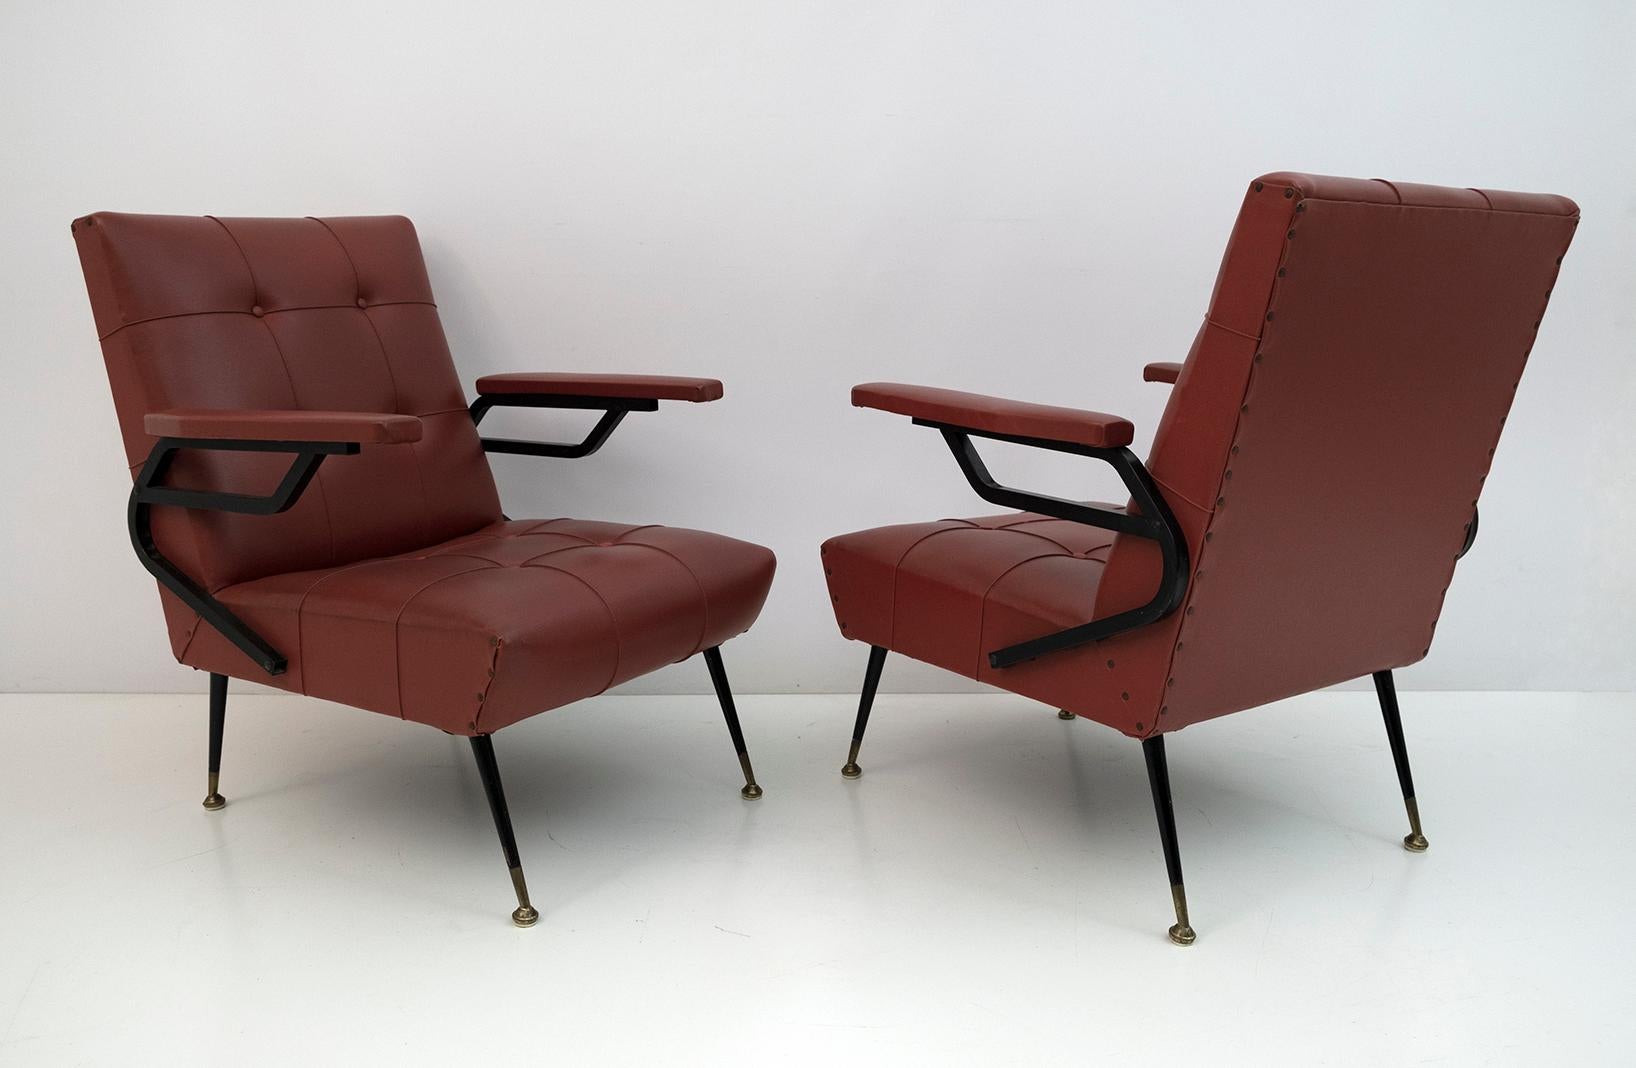 Pair of leatherette armchairs, metal and brass feet, Italian production from the 1960s. With original upholstery in good condition, as shown in photos, with normal age-related wear.